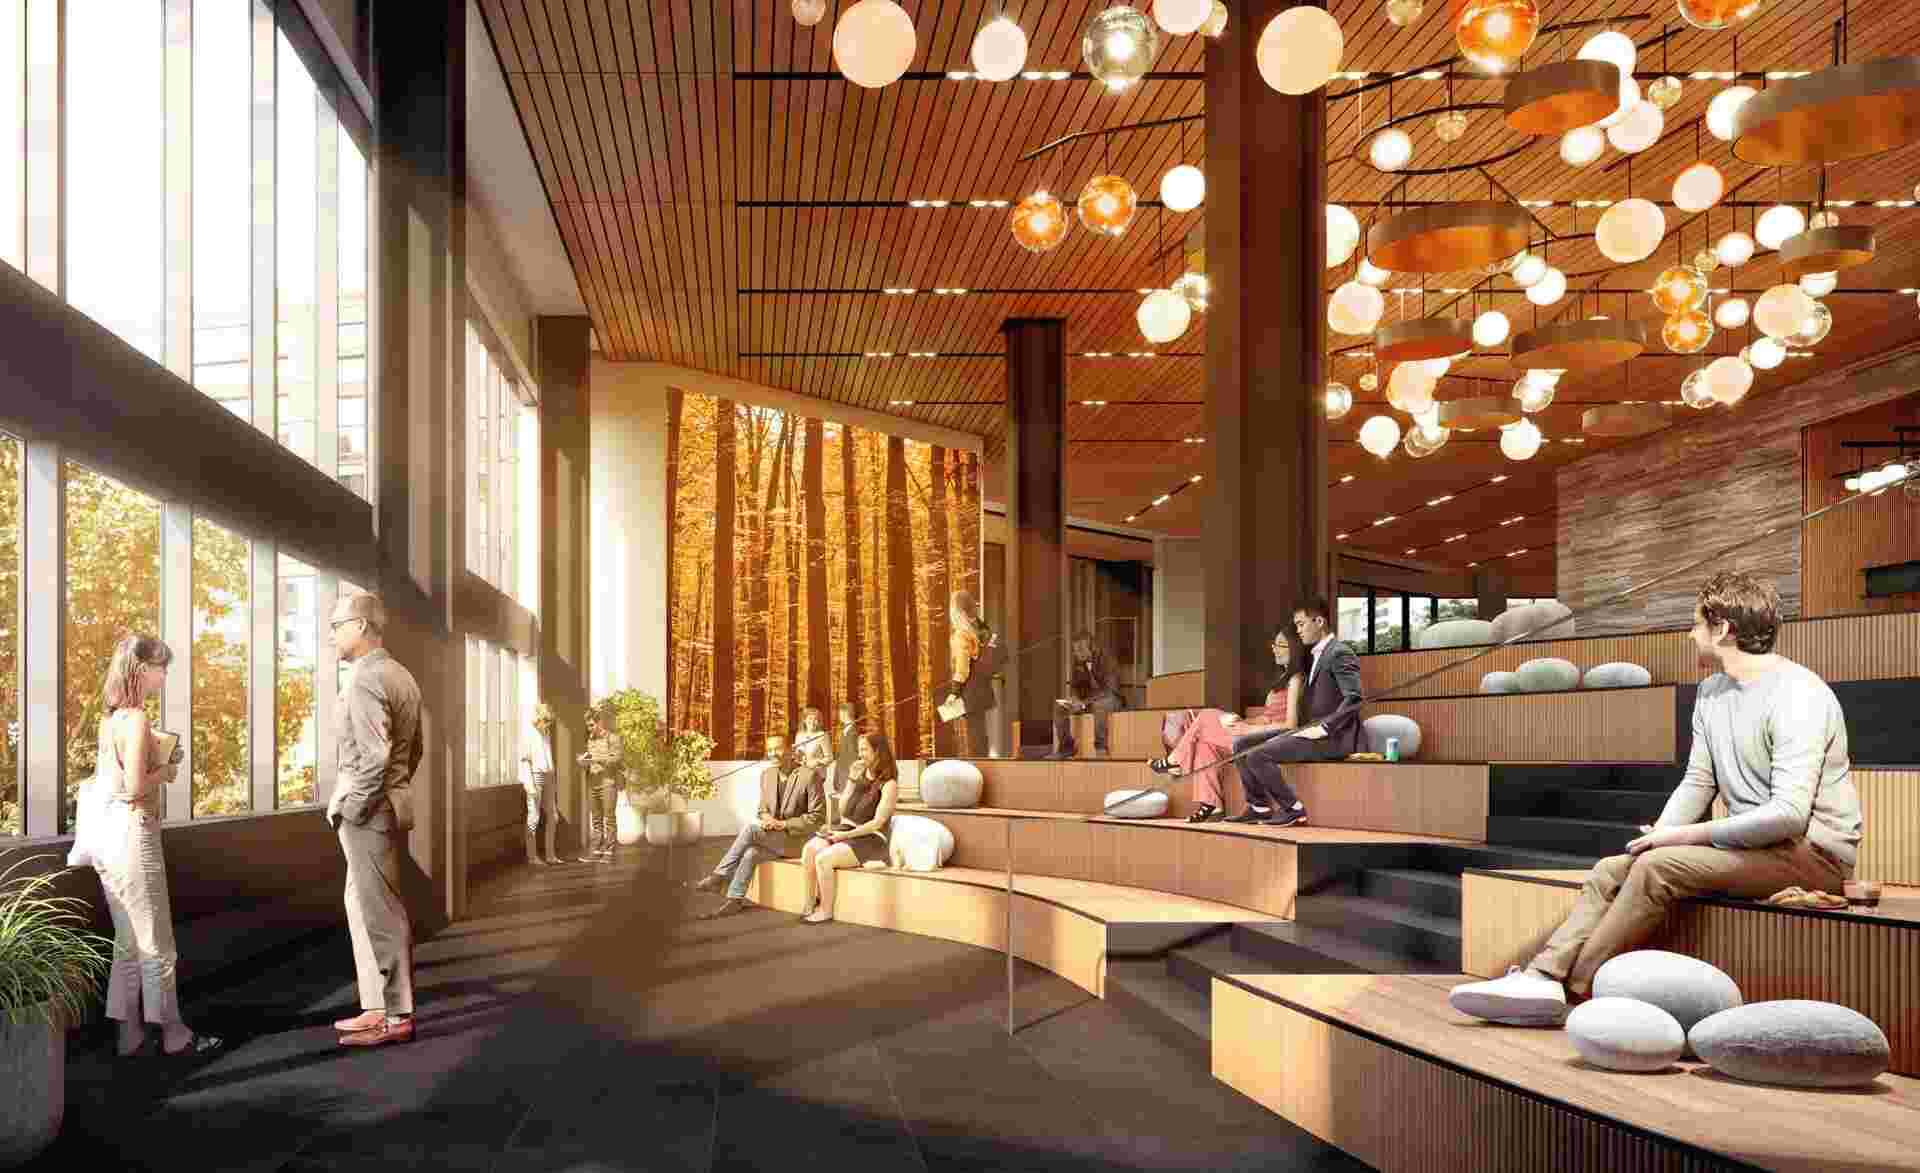 2023-09-27 15:11 HNE - 2_A-rendering-of-the-completed-lobby-showing-the-light-and-seating-features-1